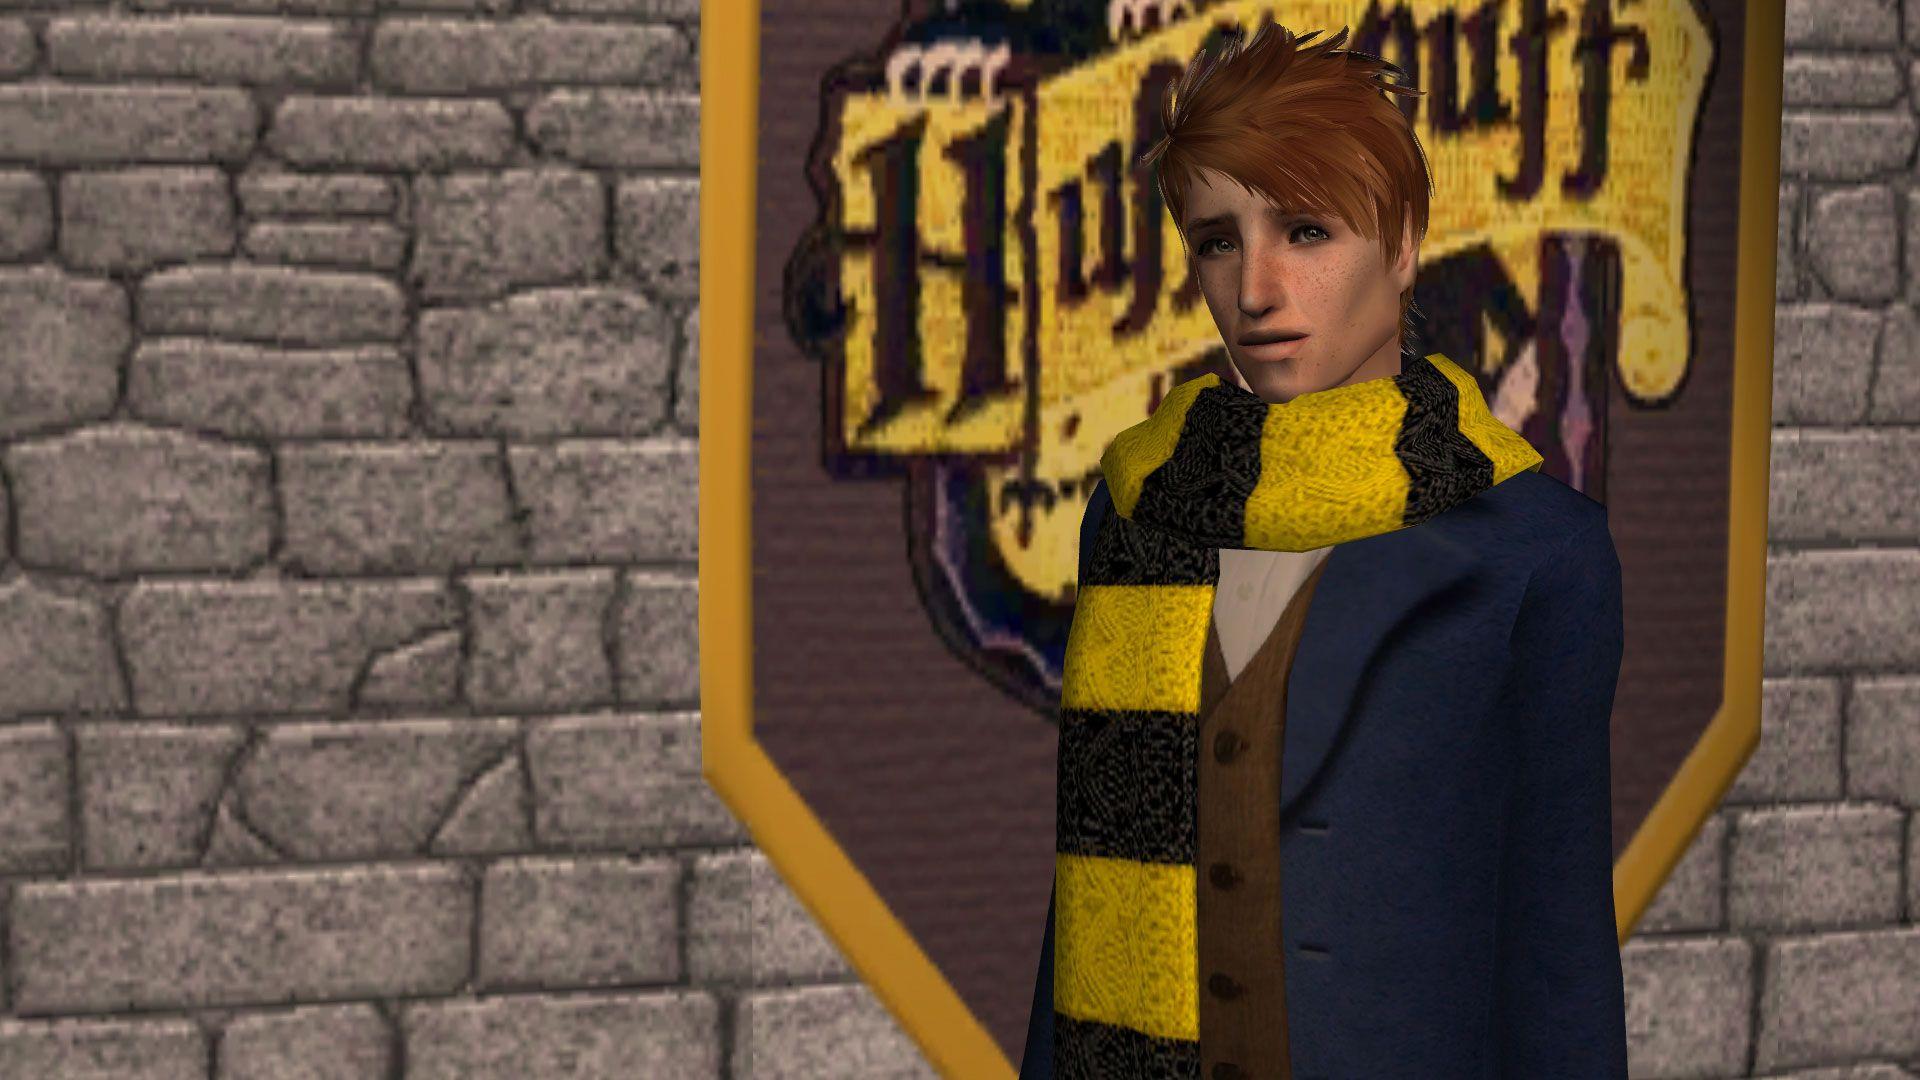 Mod The Sims Scamander as portrayed